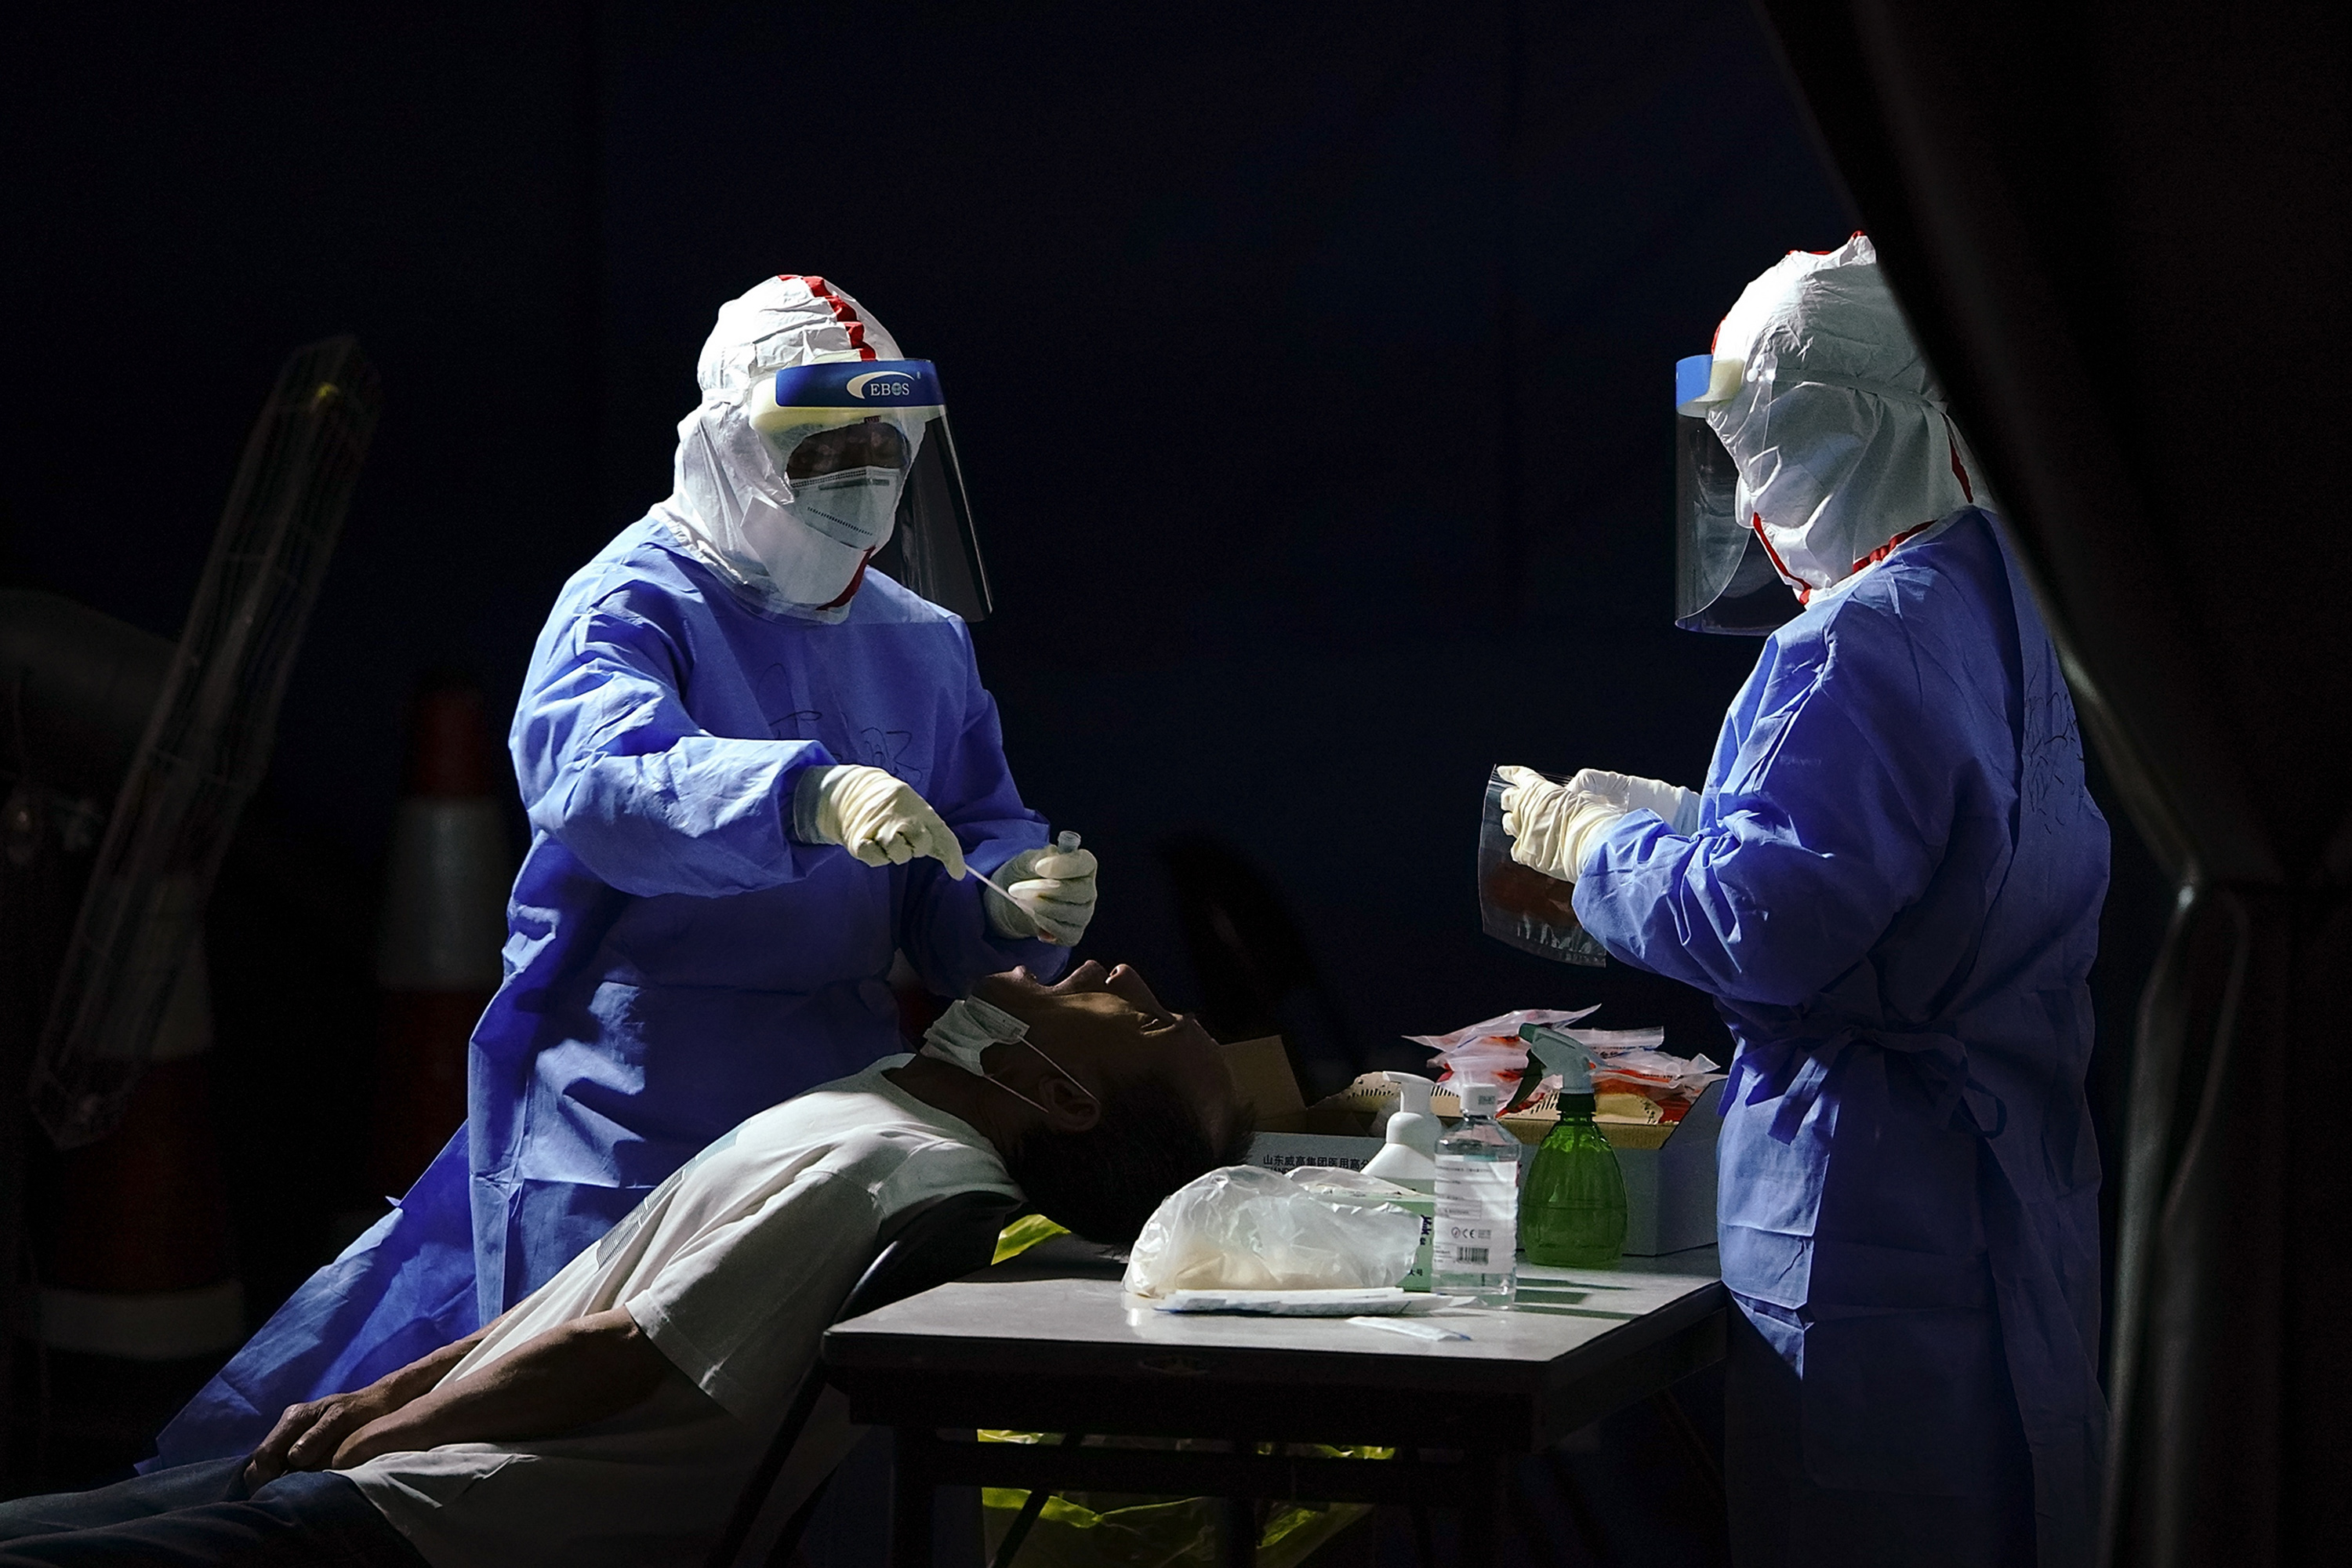 A nurse wearing a protective suit and mask takes a nucleic acid test for COVID-19 from a person who either visited or lives near the Xinfadi Market at a testing facility at a Sport Center on June 17, 2020 in Beijing, China. The authorities in Beijing have begun an operation to contain a potential second wave of coronavirus after 137 new cases were detected, the most in nine weeks. (Photo by Lintao Zhang/Getty Images)